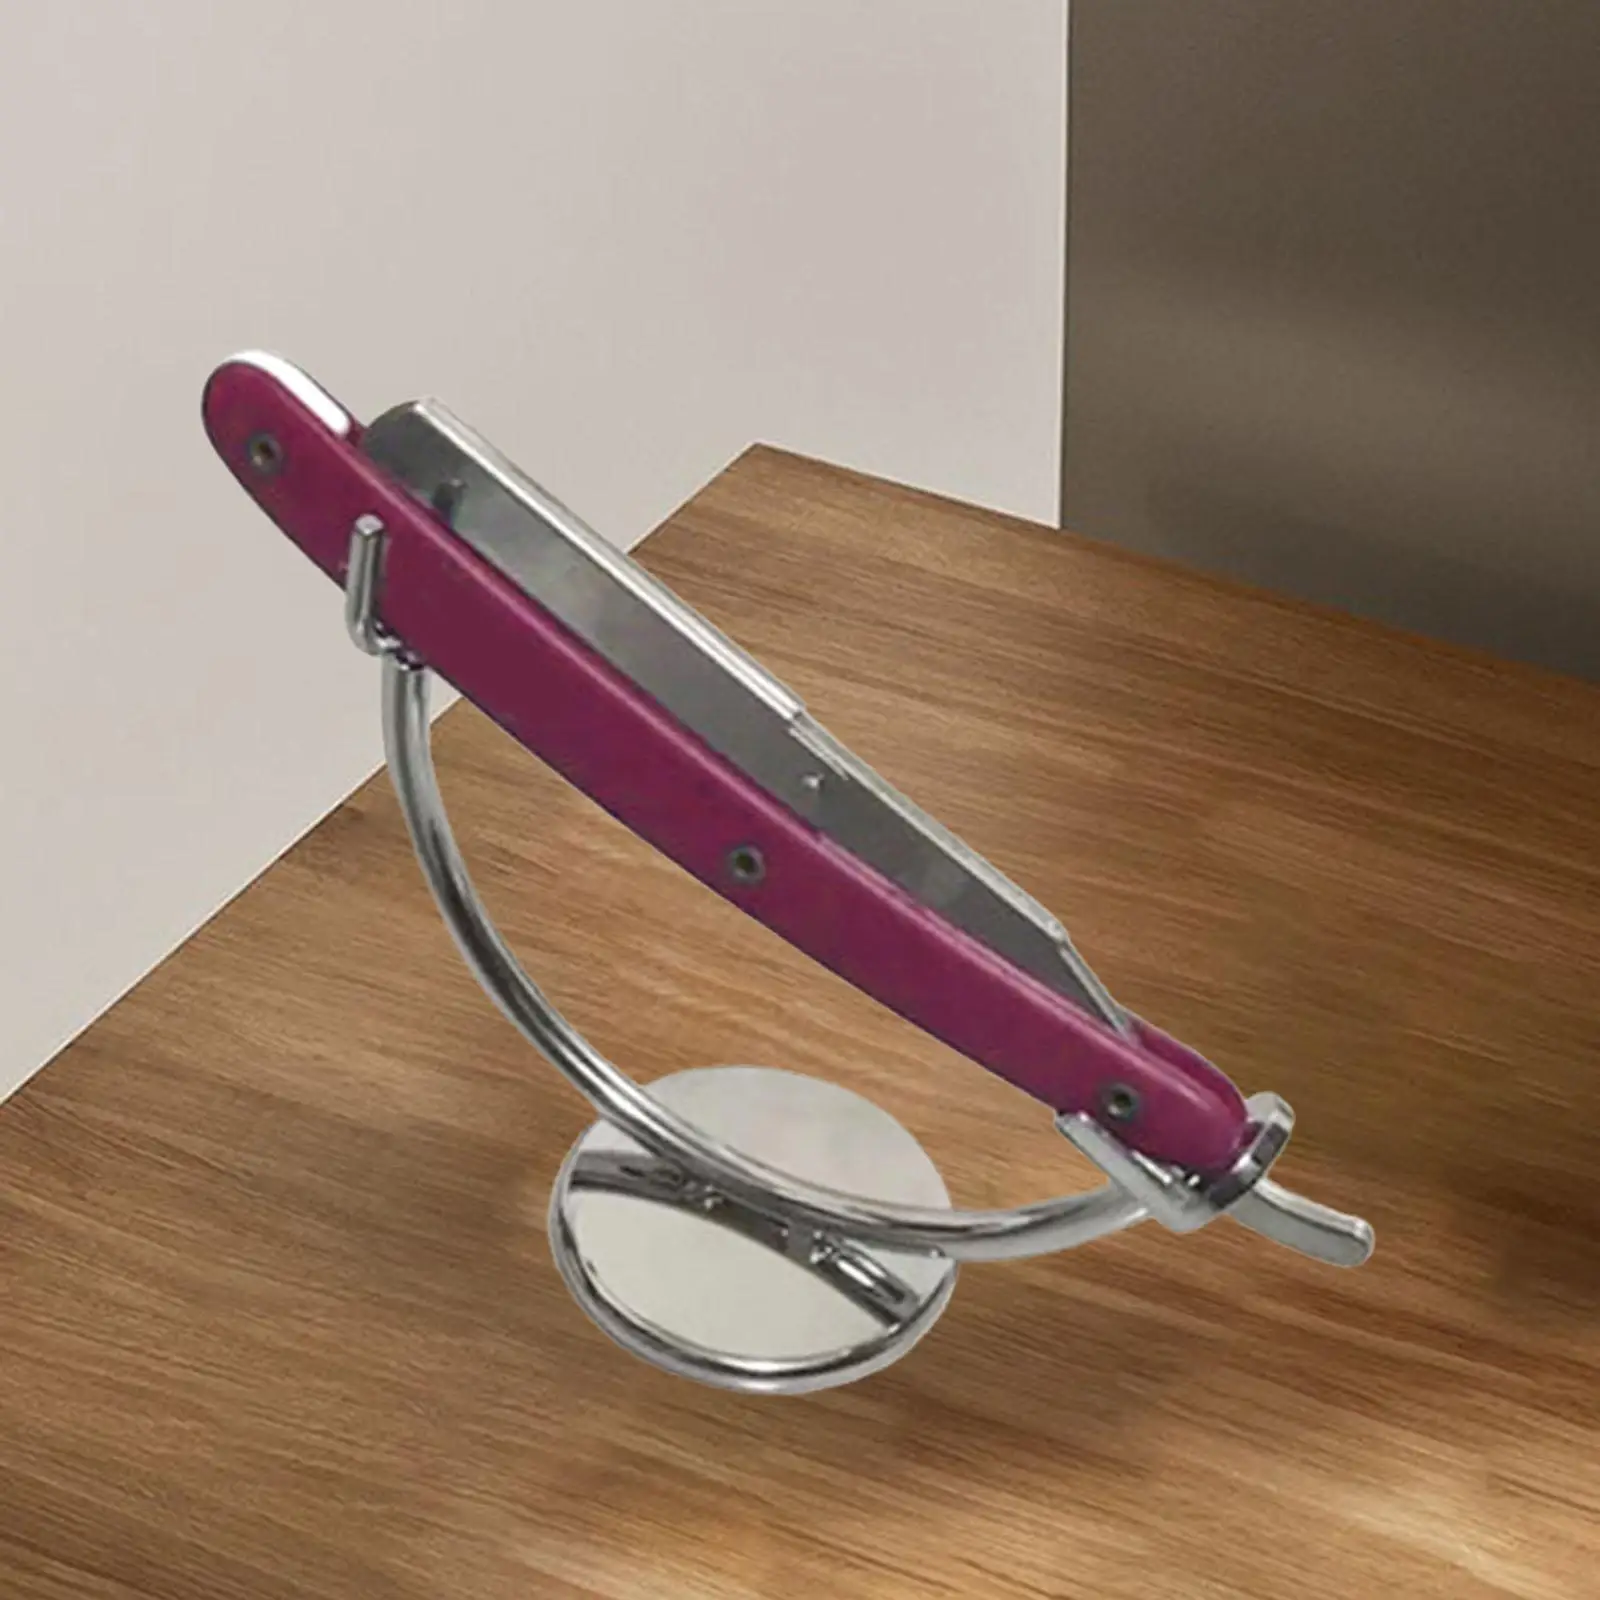 Straight Razor Stand Curved Stand Rack Shaving Stand Razor Holder Stable Bottom for Straight, and Cartridge Razors Accessory